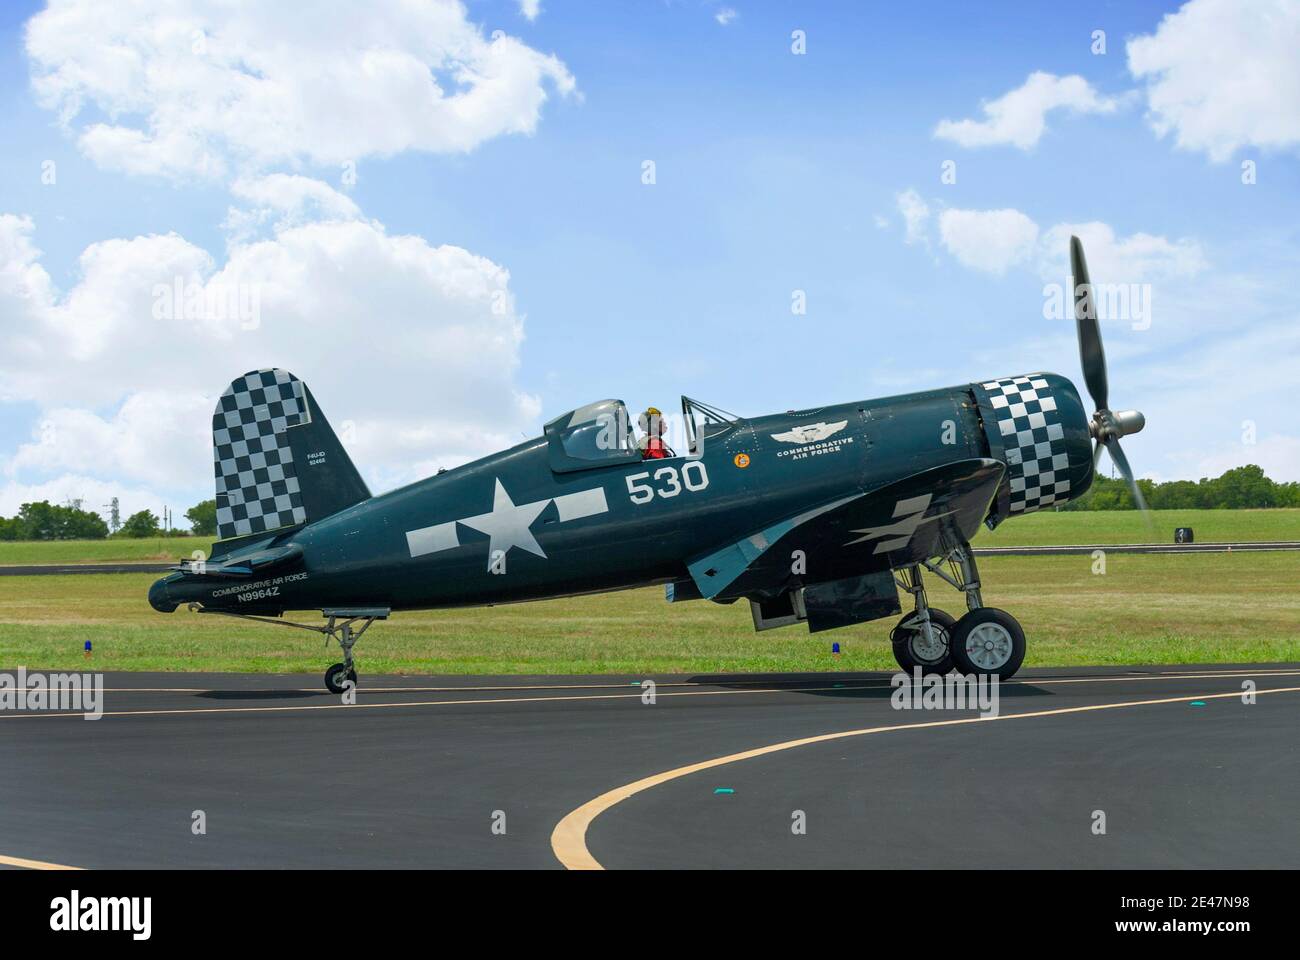 Fort Worth, Texas, USA, 17 th Jun 2012. Old Vintage airplane on the runway Stock Photo